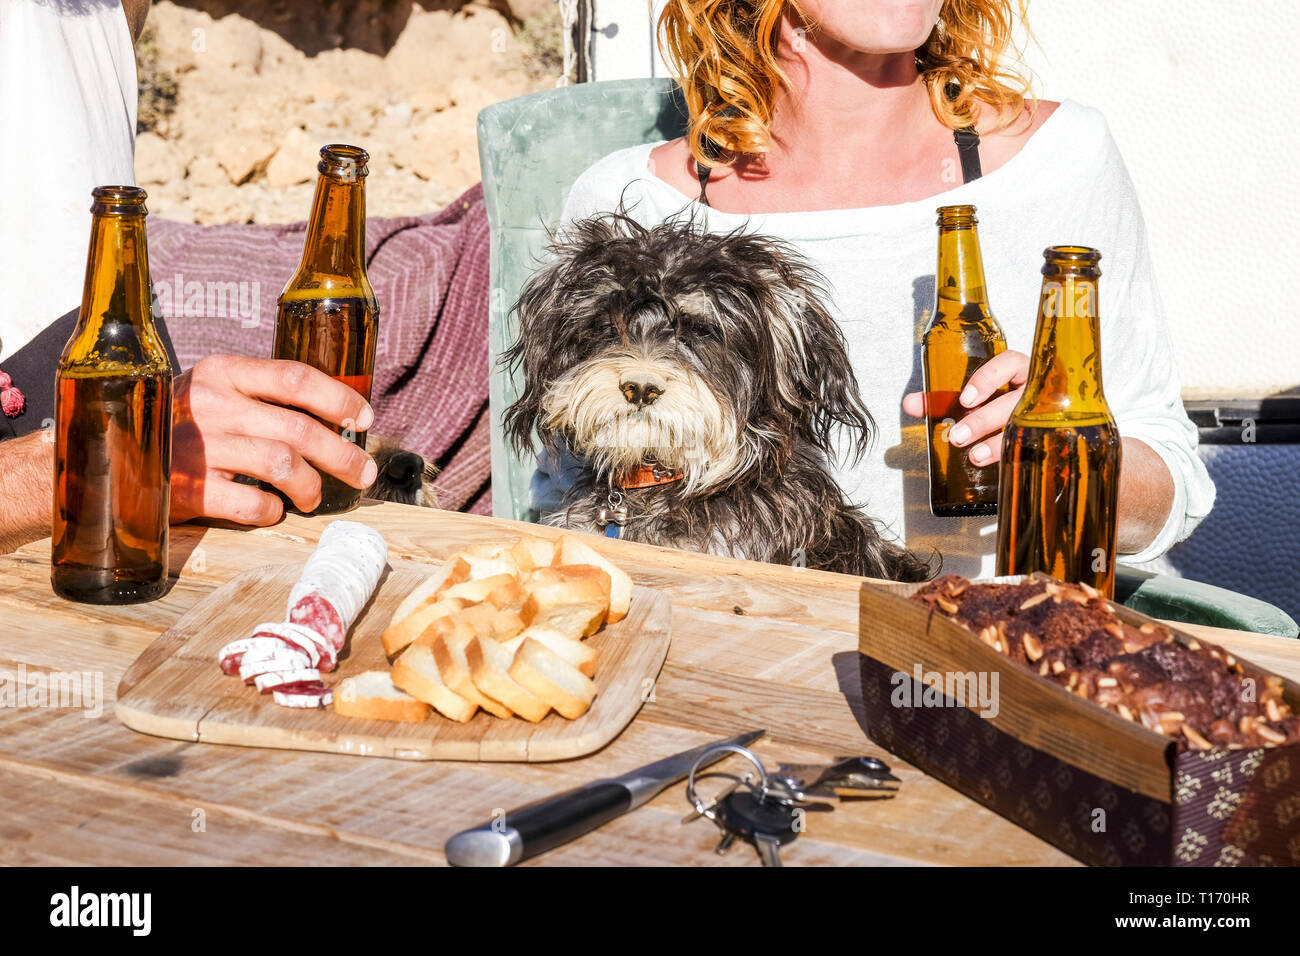 Portrait of sad interested dog looking at food salami and vread sitting on a table with humans friends drinking beer Stock Photo